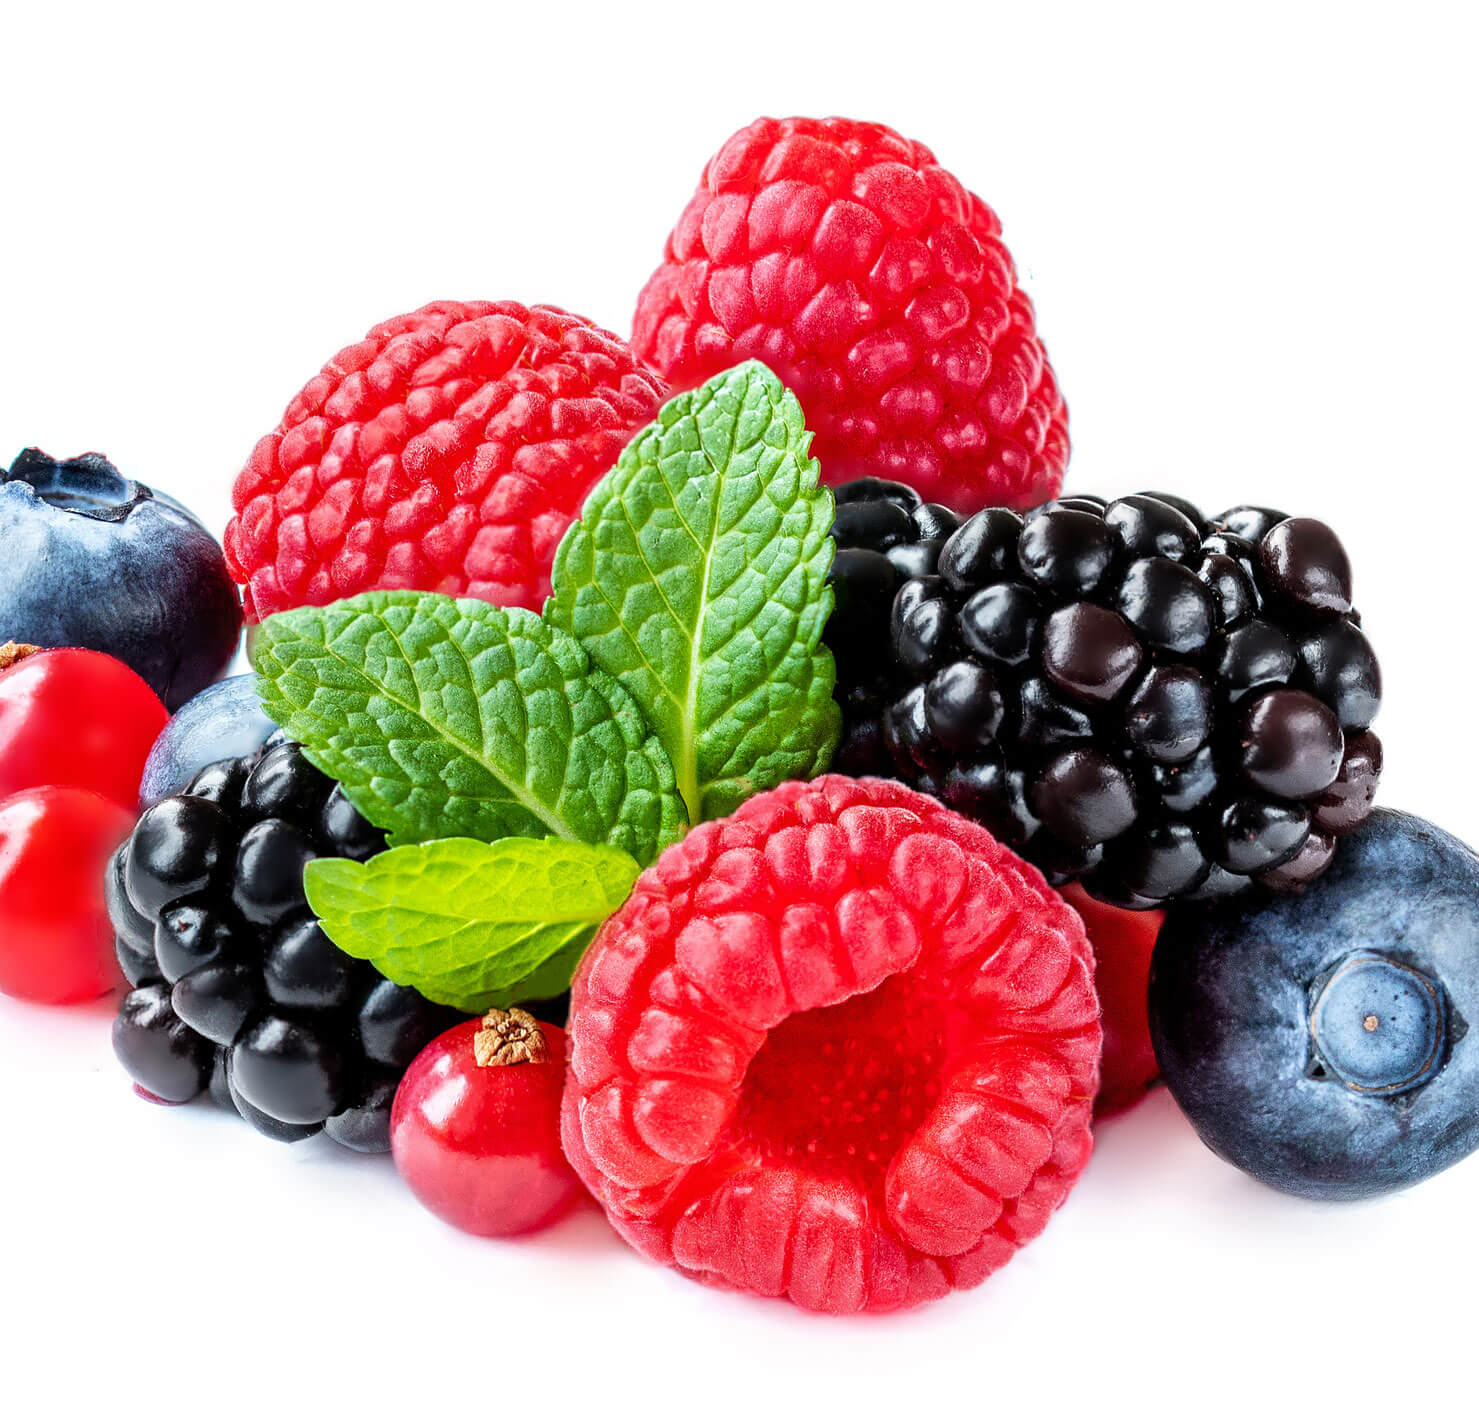 “Berrylicious: The Top 8 Berries for a Healthy Boost!”